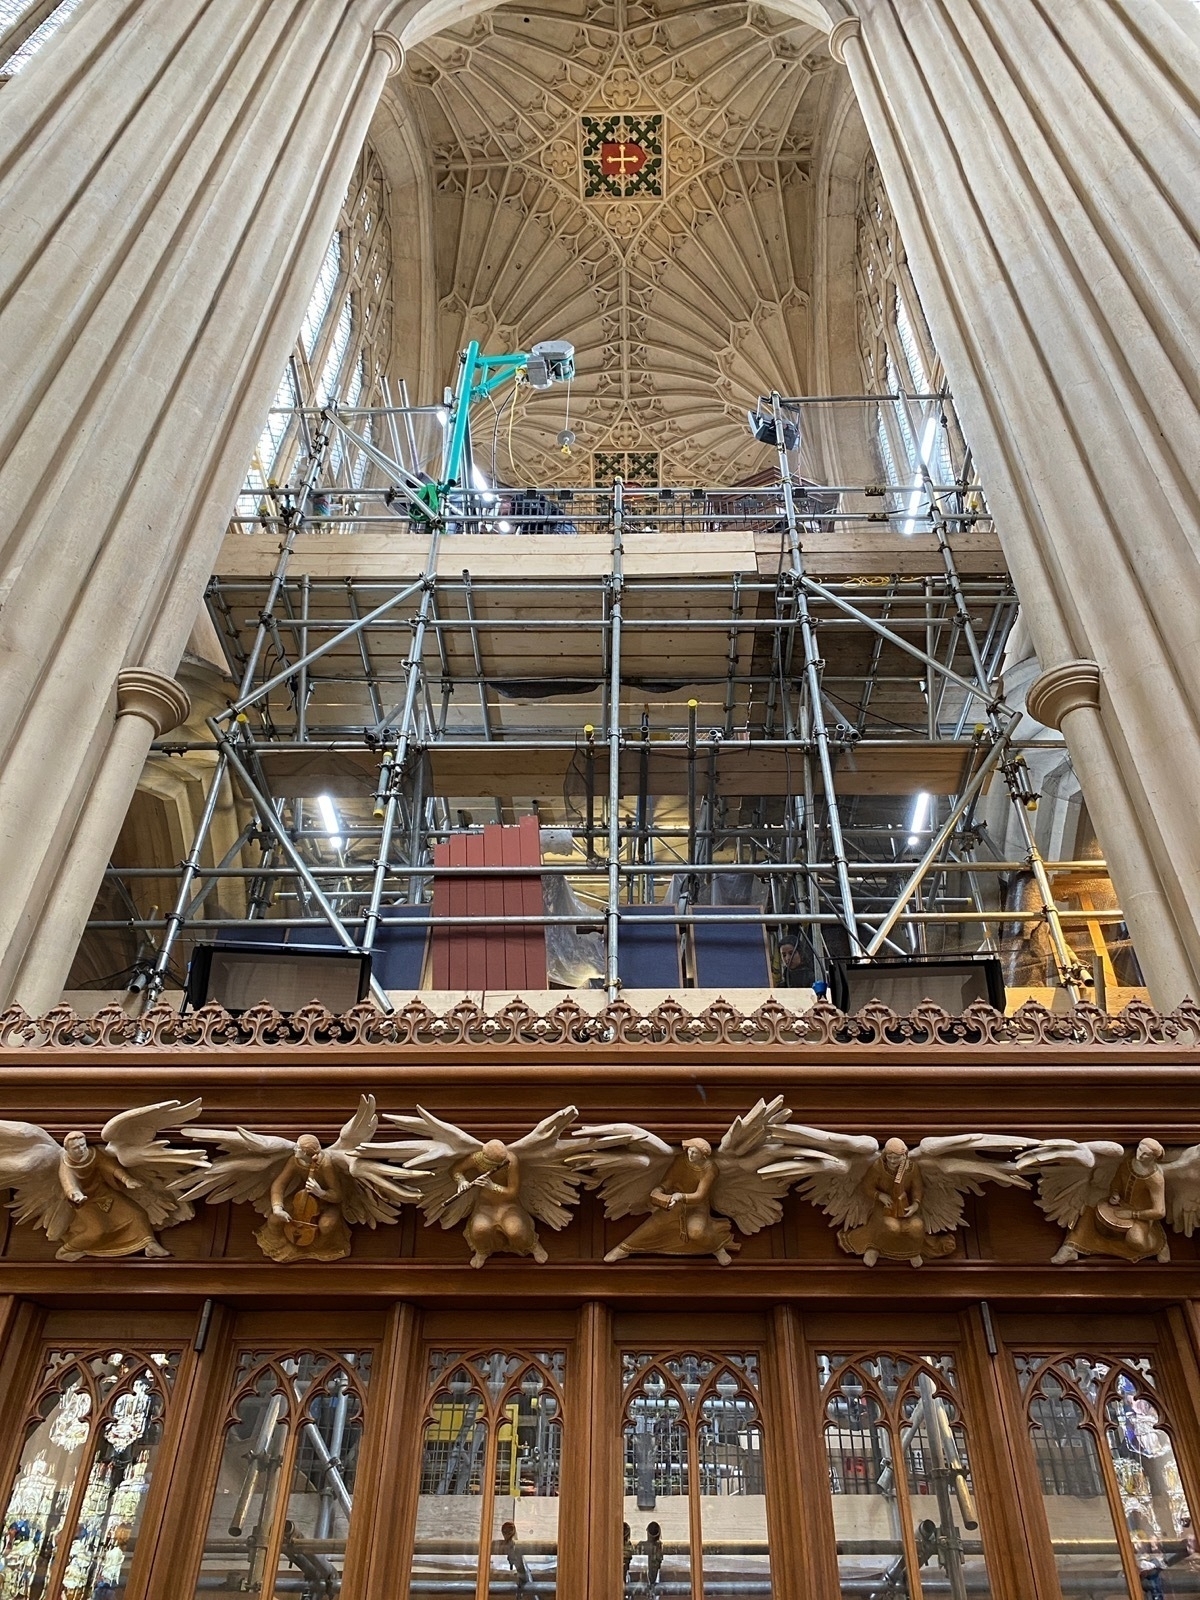 Scaffolding in a vaulted church ceiling